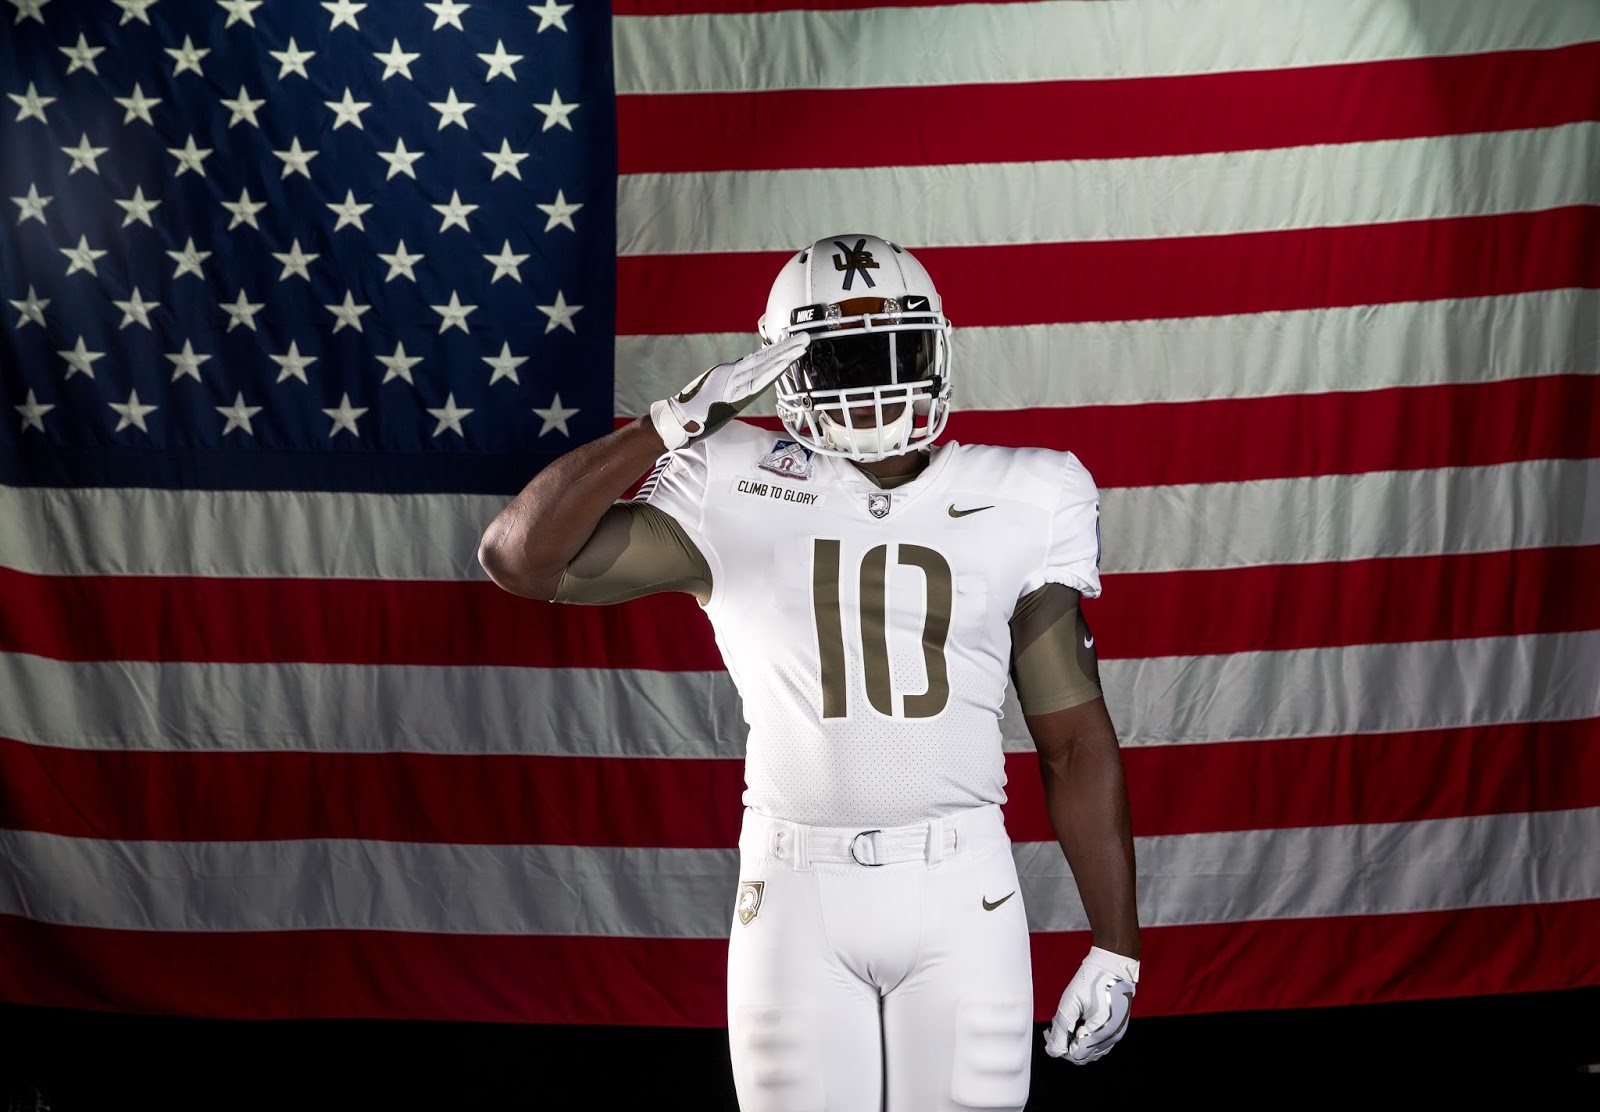 Army Unveils New Nike Uniforms for this Year’s ArmyNavy Game (Photos